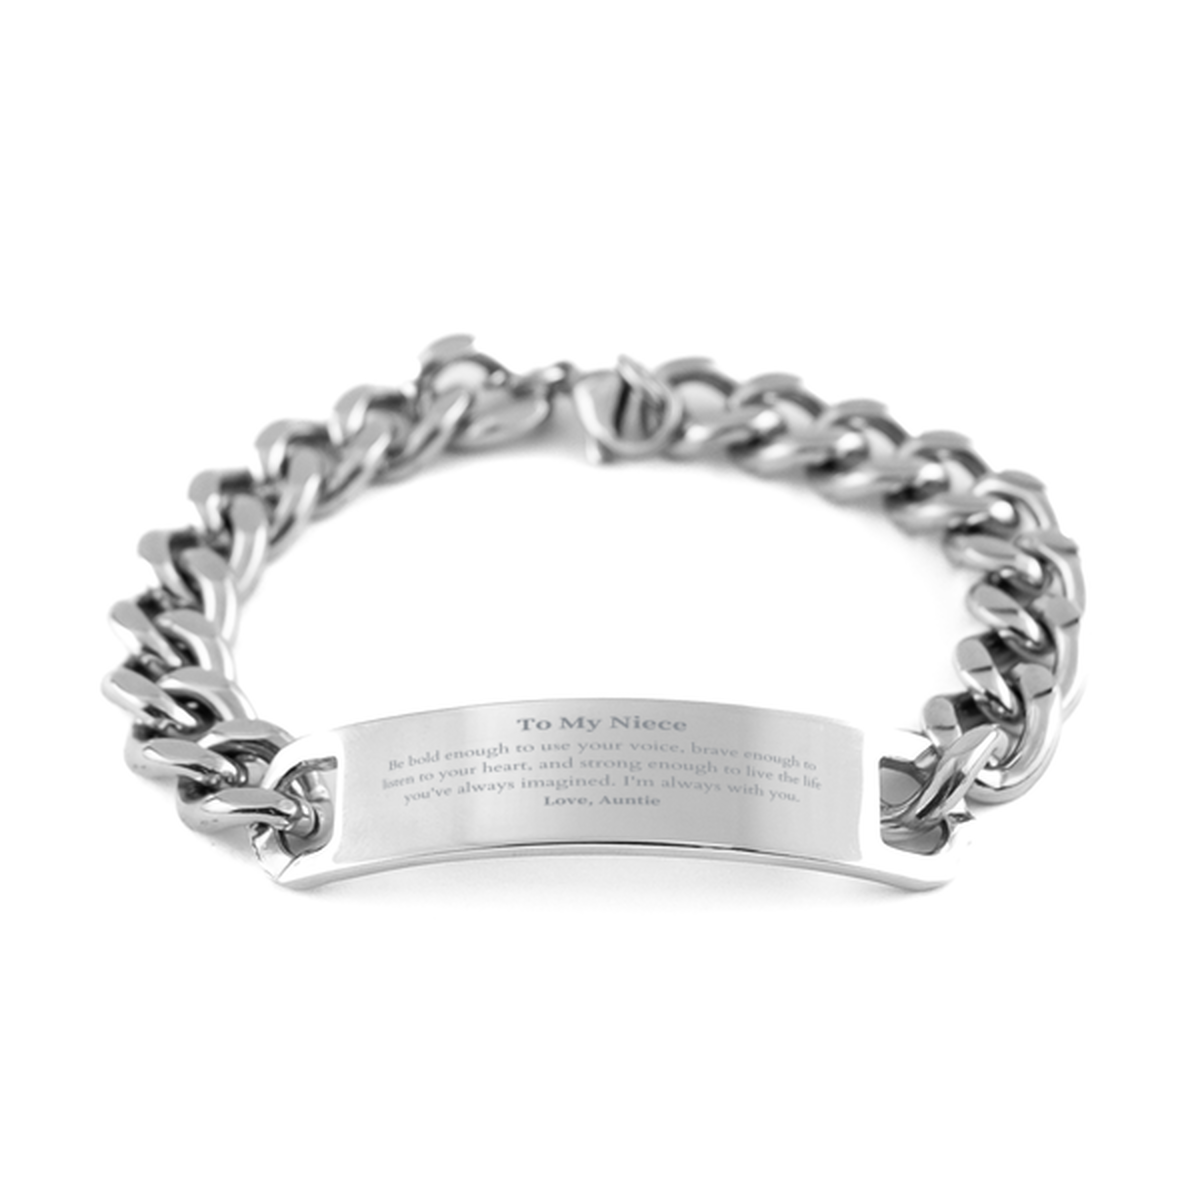 Keepsake Niece Cuban Chain Stainless Steel Bracelet Gift Idea Graduation Christmas Birthday Niece from Auntie, Niece Be bold enough to use your voice, brave enough to listen to your heart. Love, Auntie